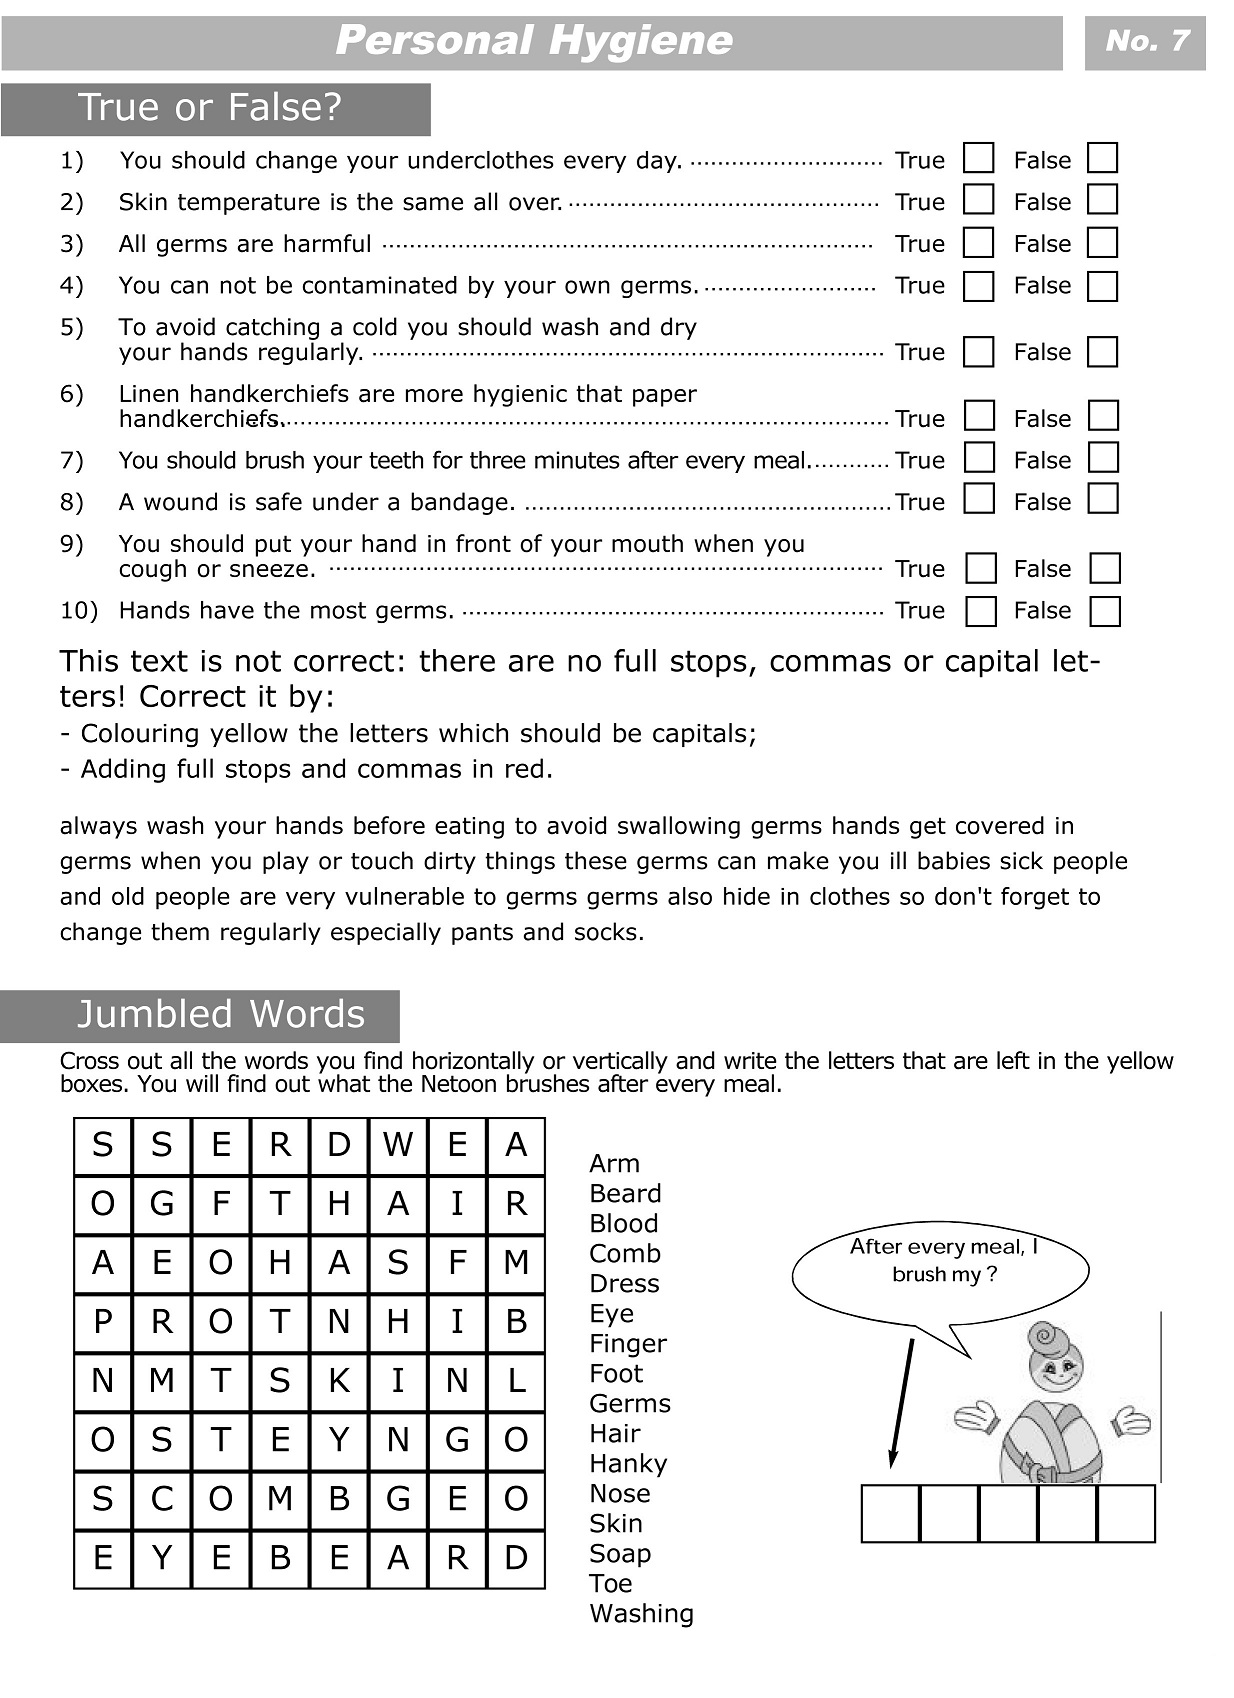 Personal Hygiene Activities for Kids Worksheets Image